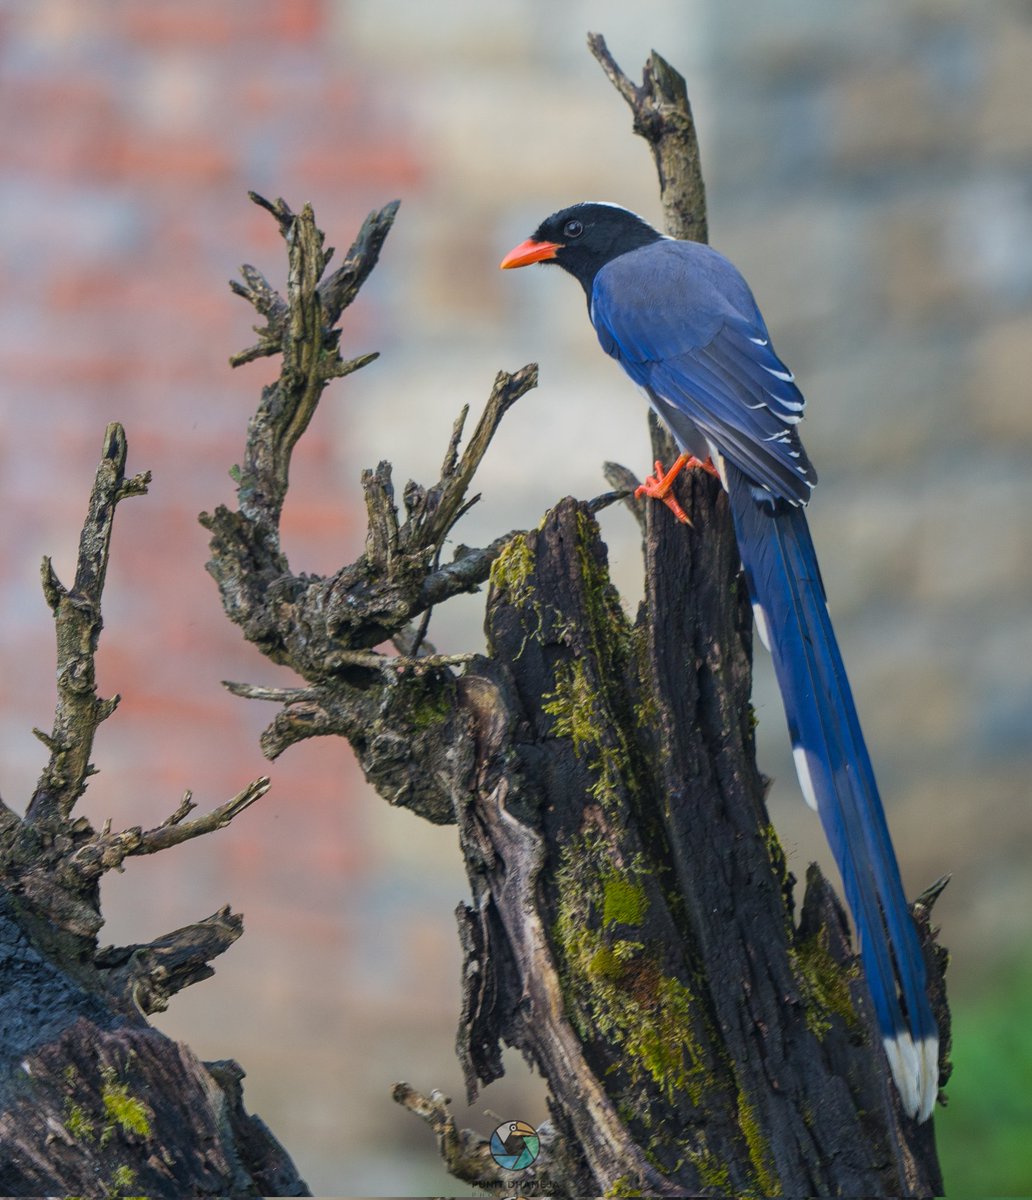 Red Billed Blue magpie is found in lowland and foothill Pic taken at Shyamala Taal. 
#IndiAves 
#IndiWild 
#birdwatching 
#ThePhotoHour 
#BirdsSeenIn2023 
#NaturePhotography 
#wildlifephotography